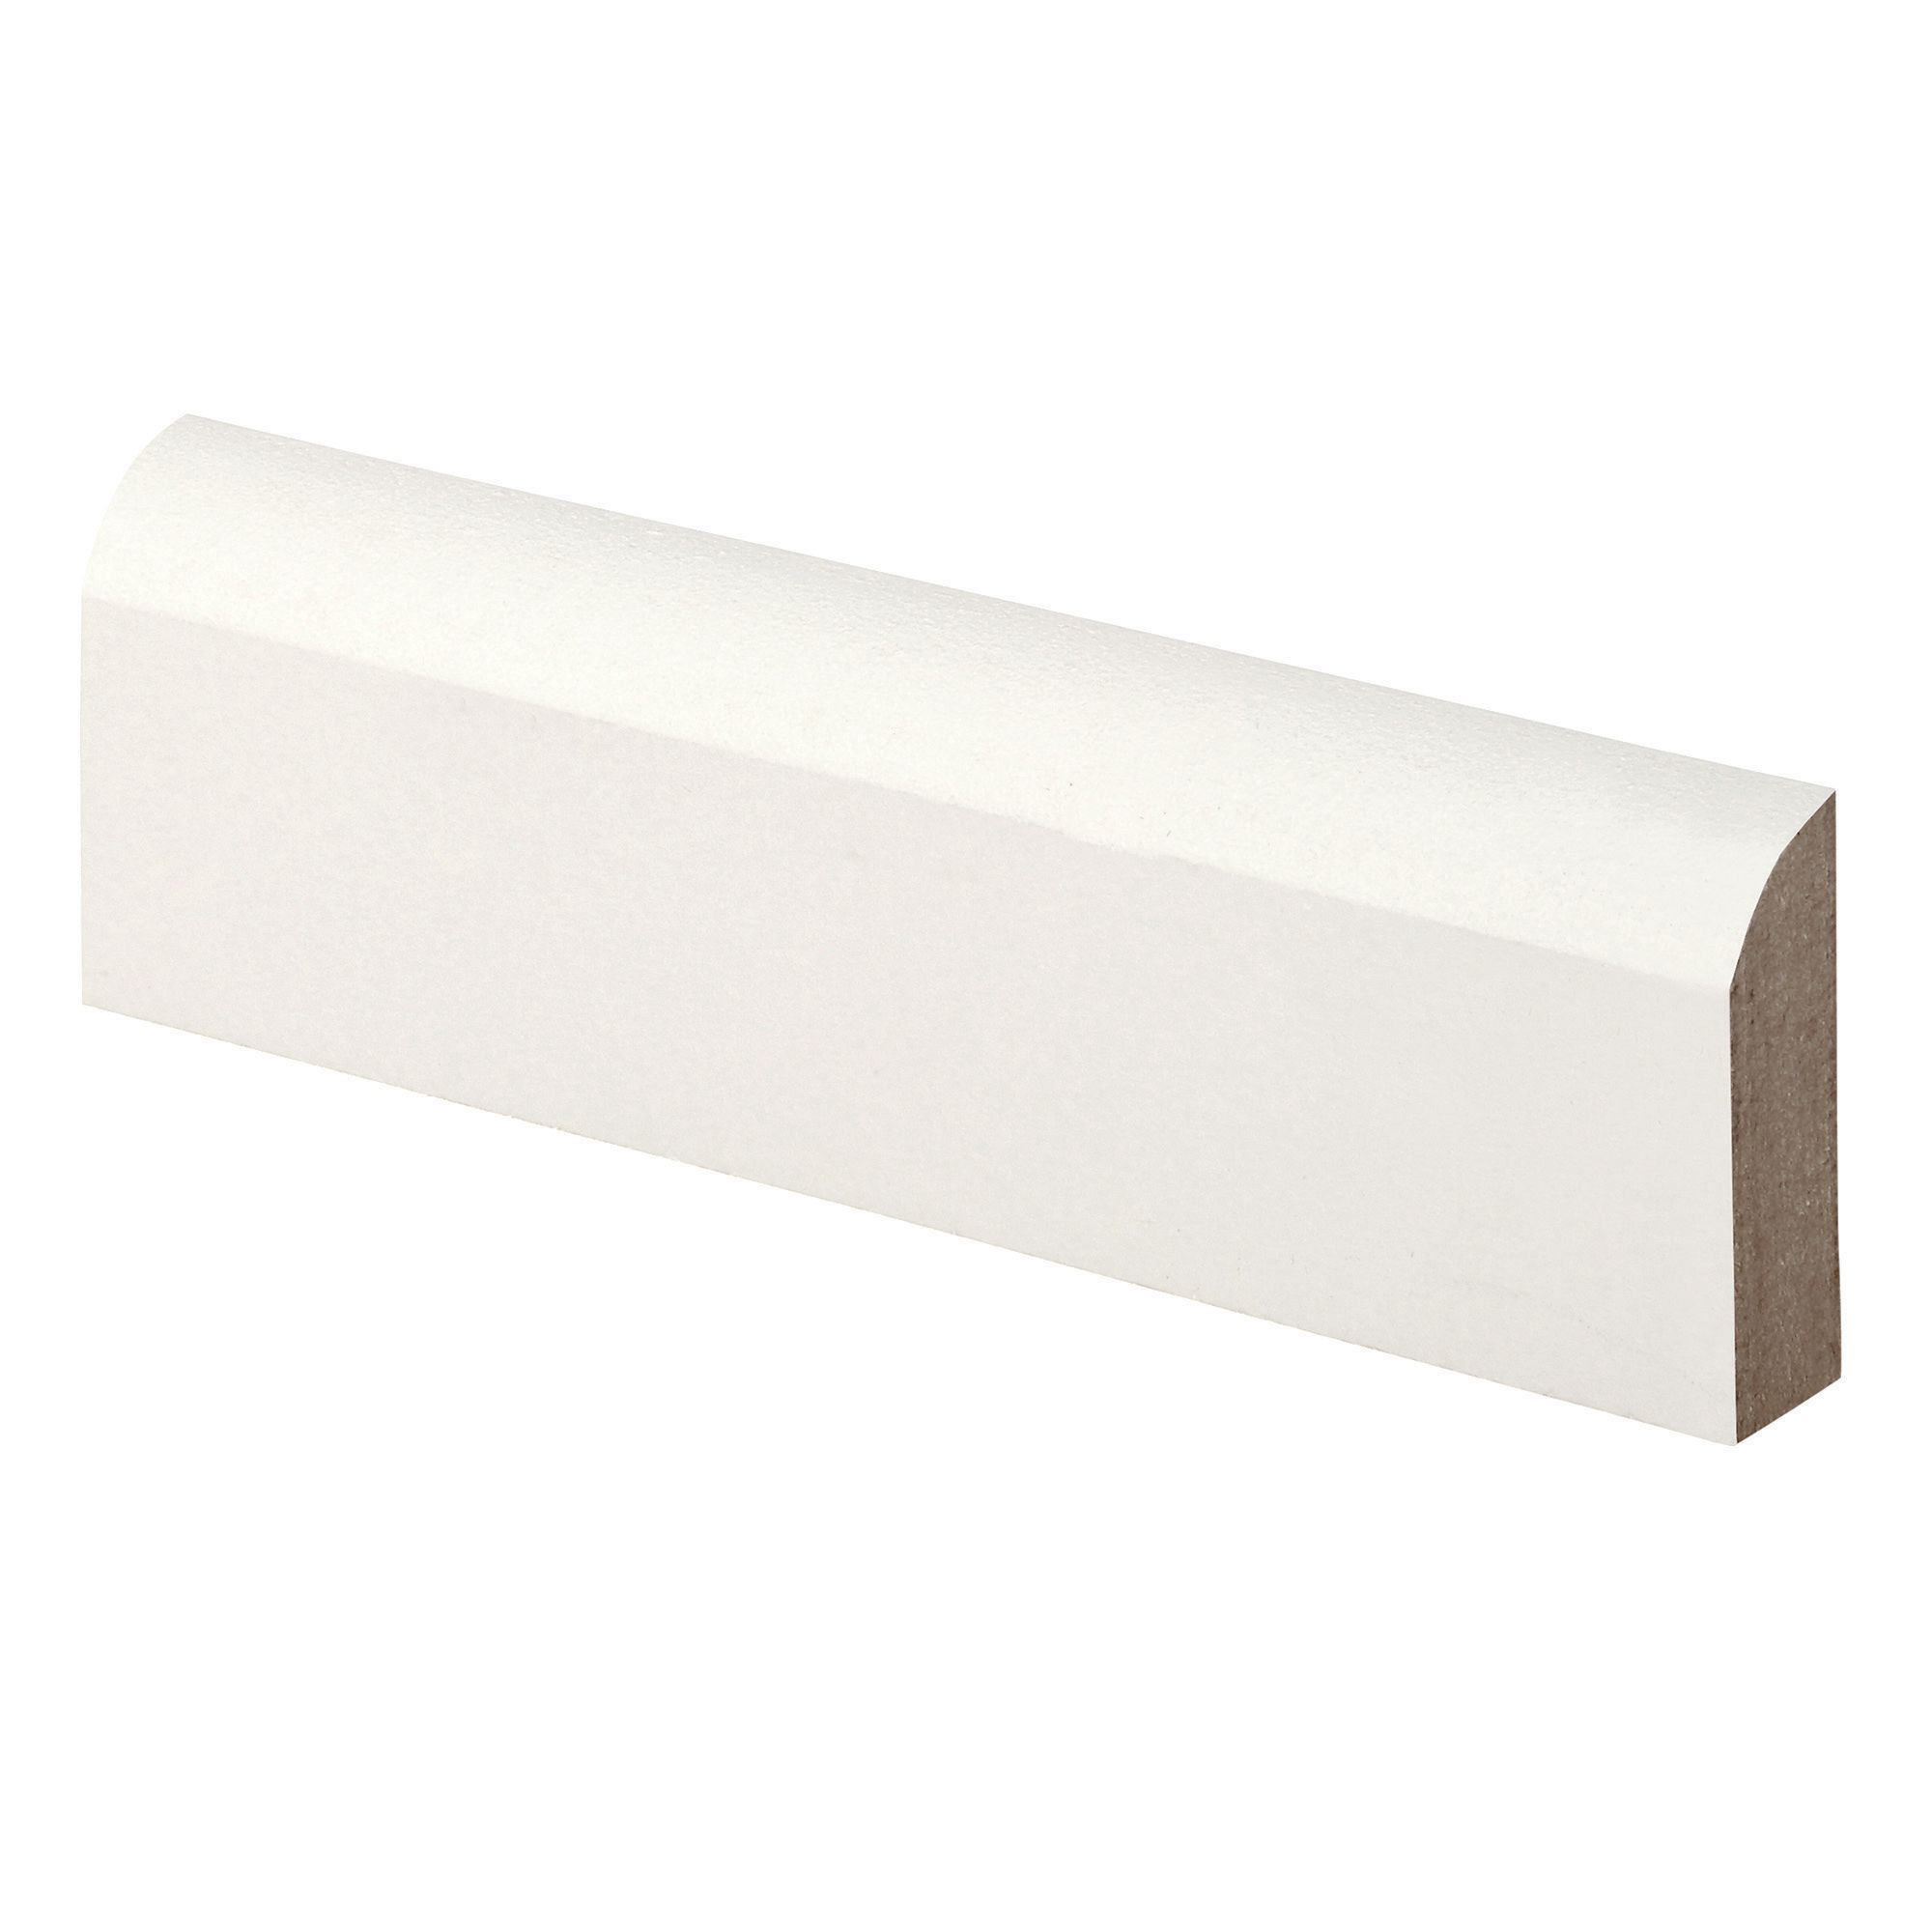 Image of Wickes Bullnose Primed MDF Architrave - 14.5mm x 44mm x 2.1m